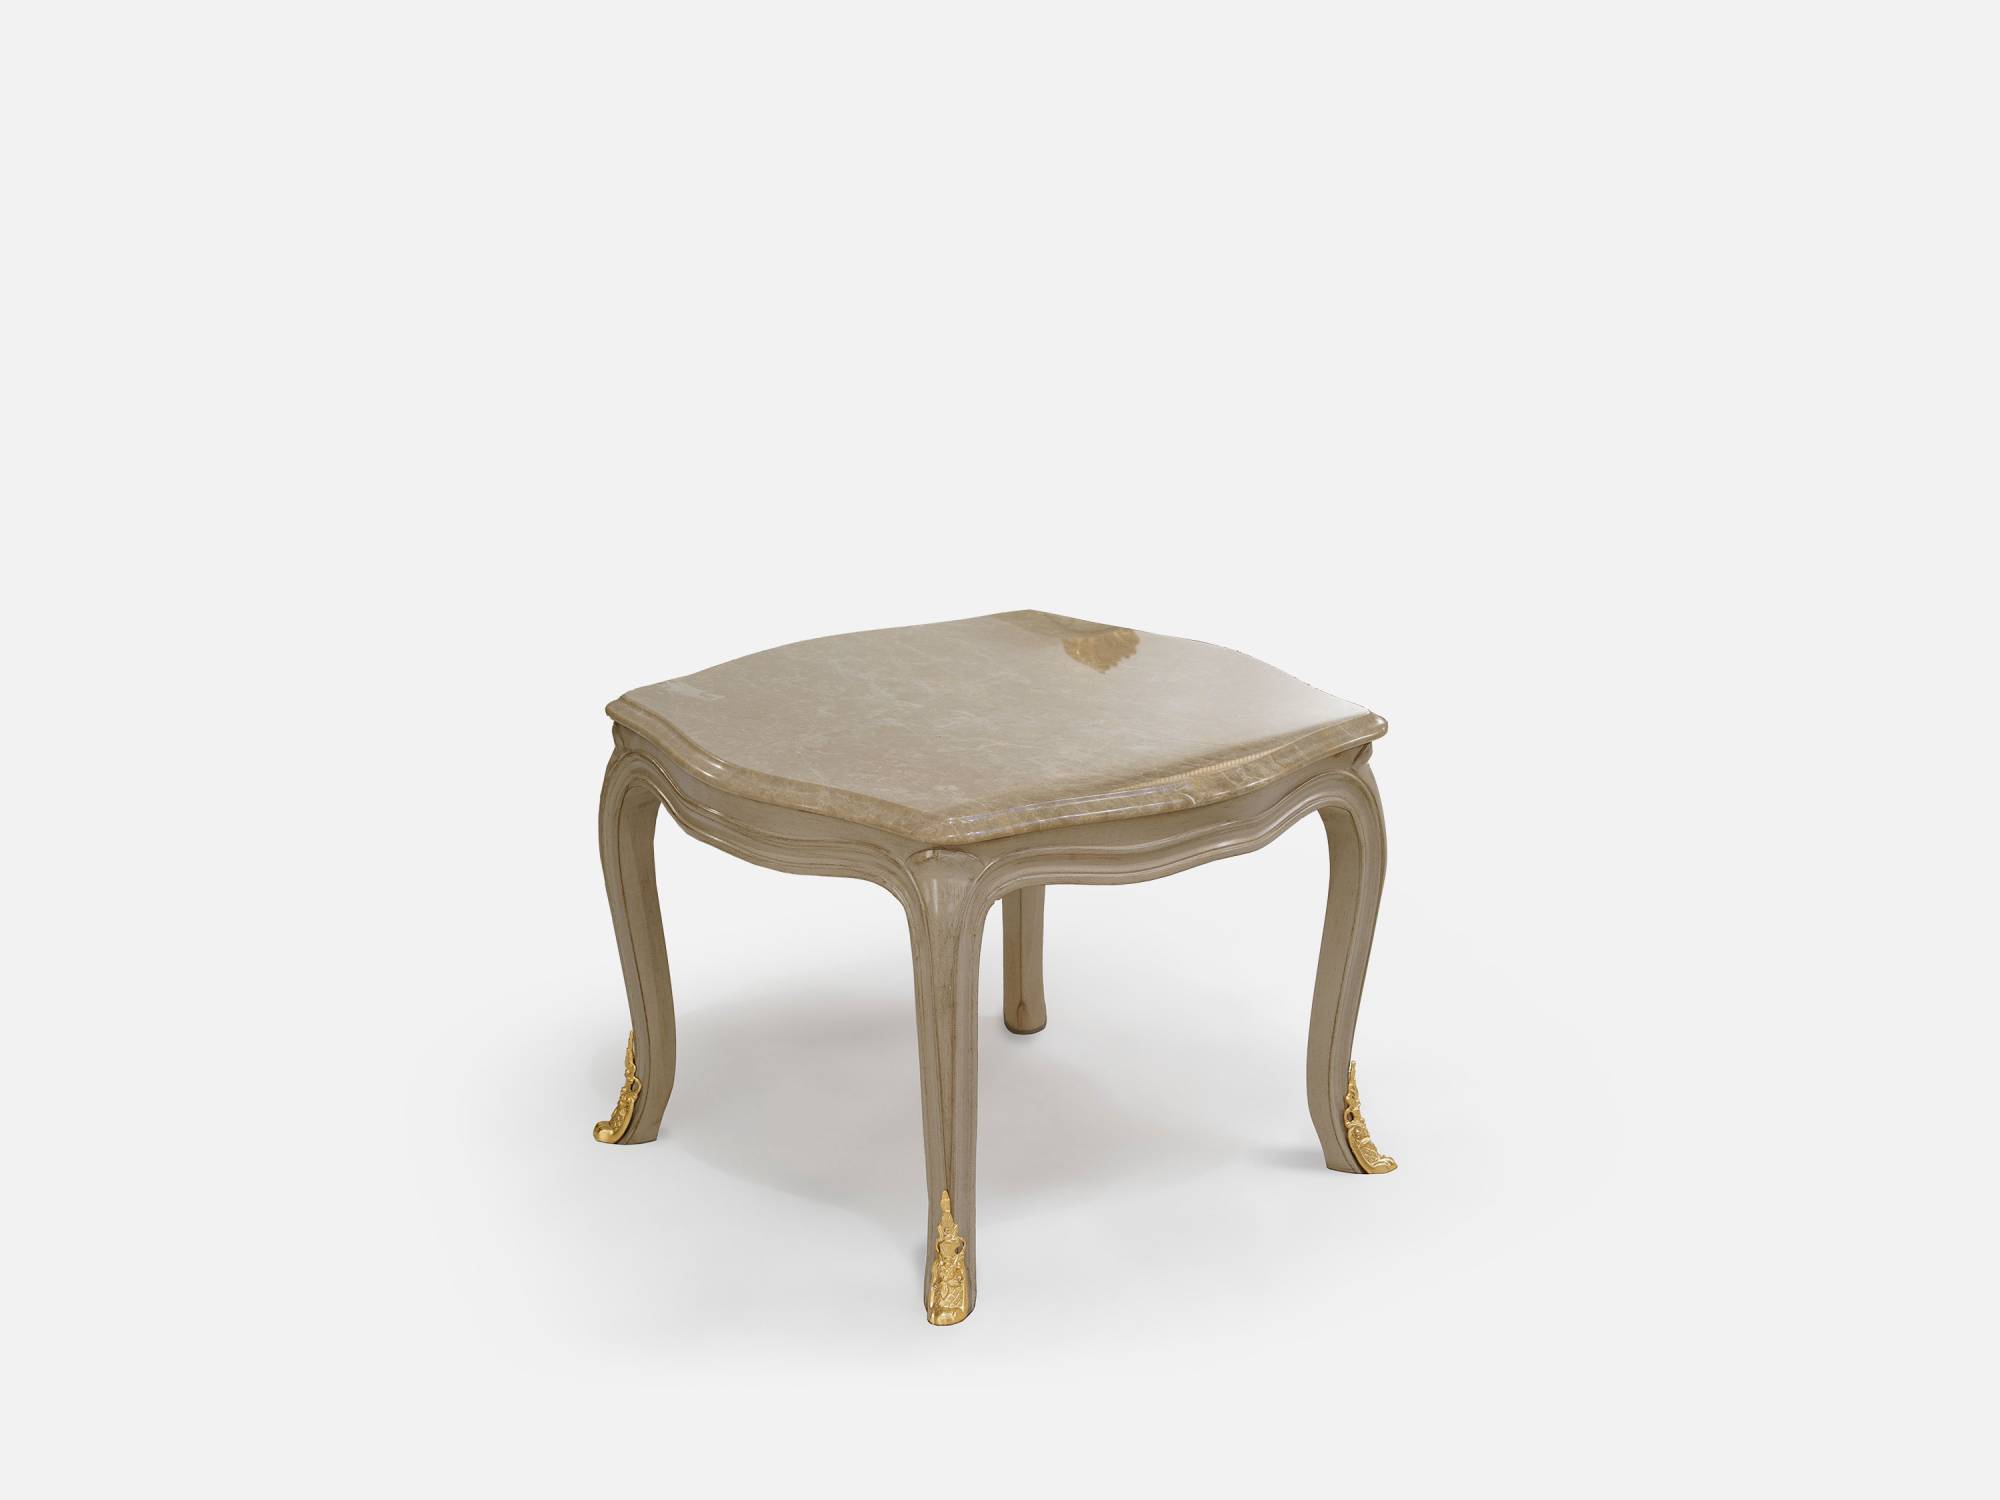 ART. 2202 - C.G. Capelletti quality furniture with made in Italy contemporary Small tables